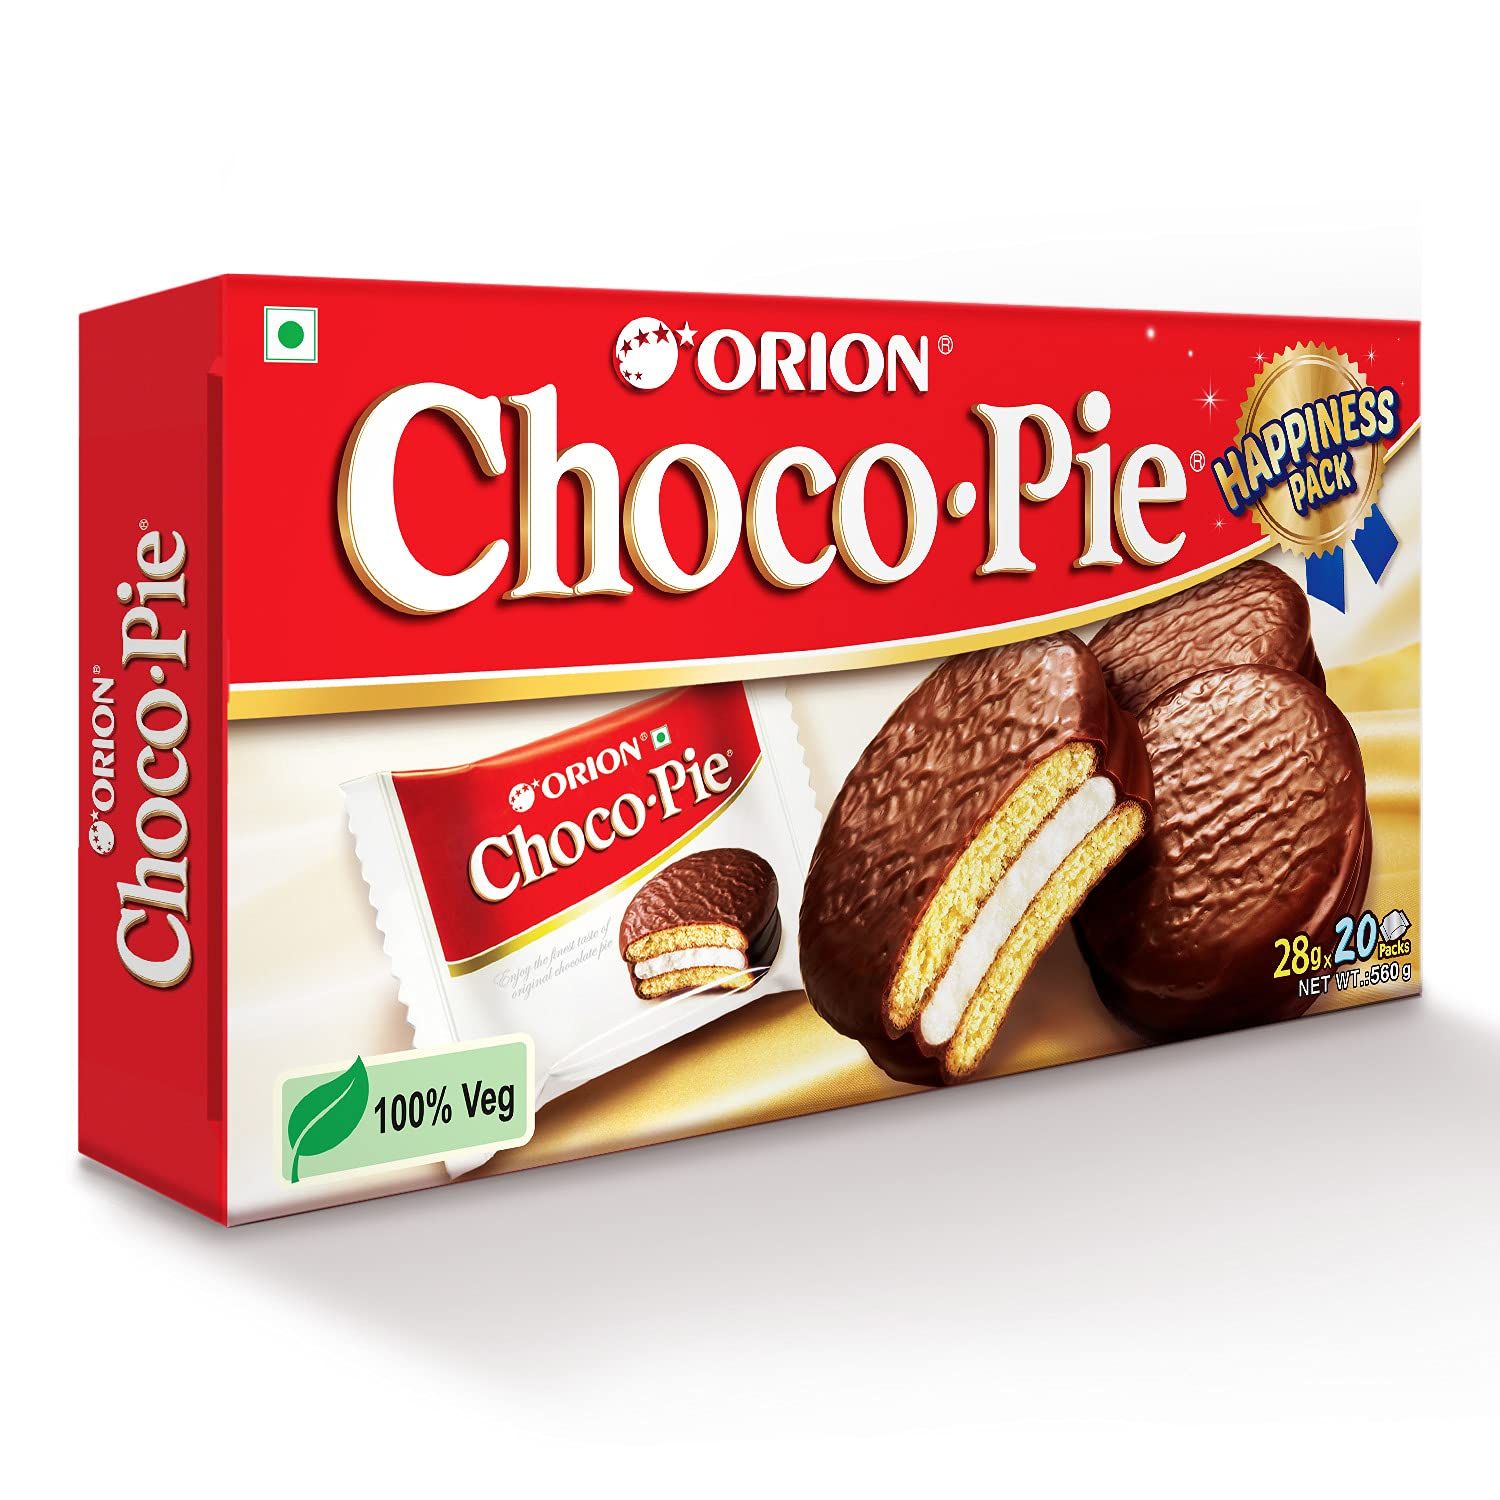 Orion Choco Pie Chocolate Coated Biscuit Image